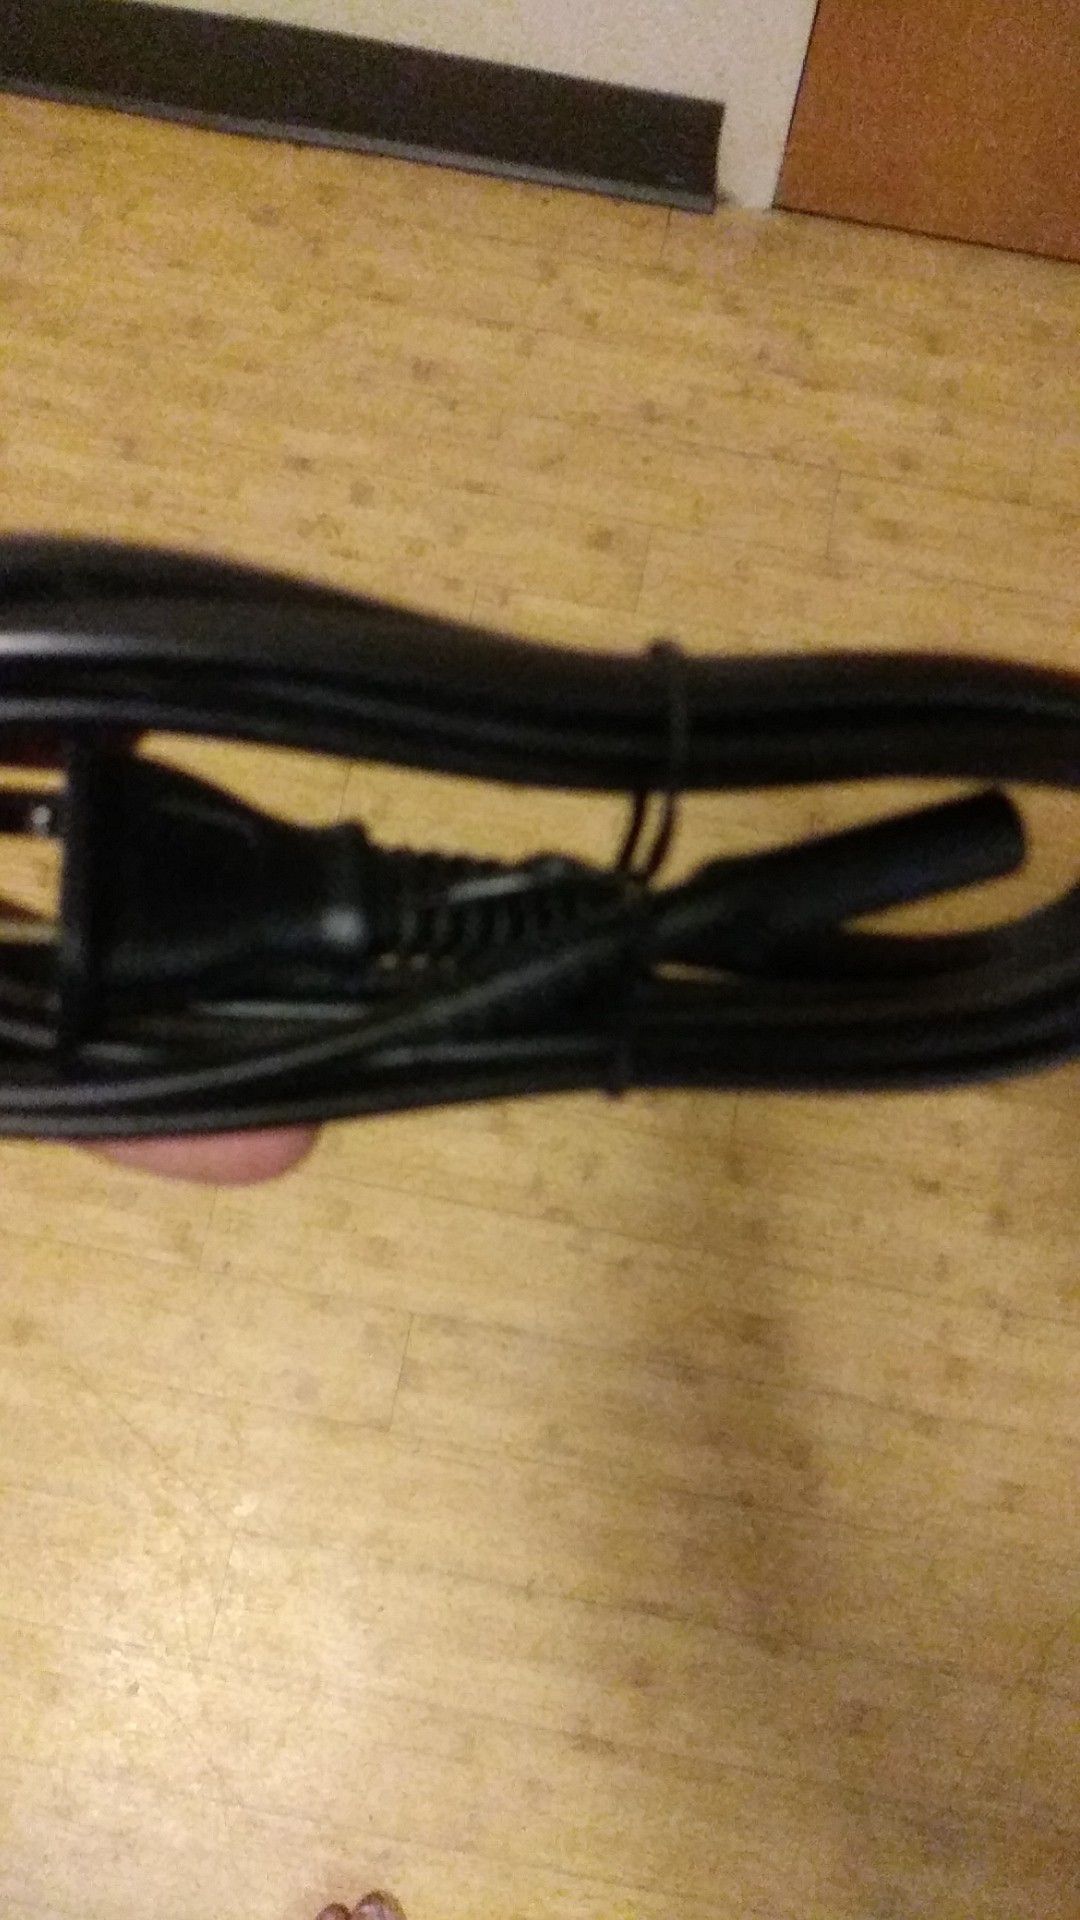 Playstaion 4 power supply cord